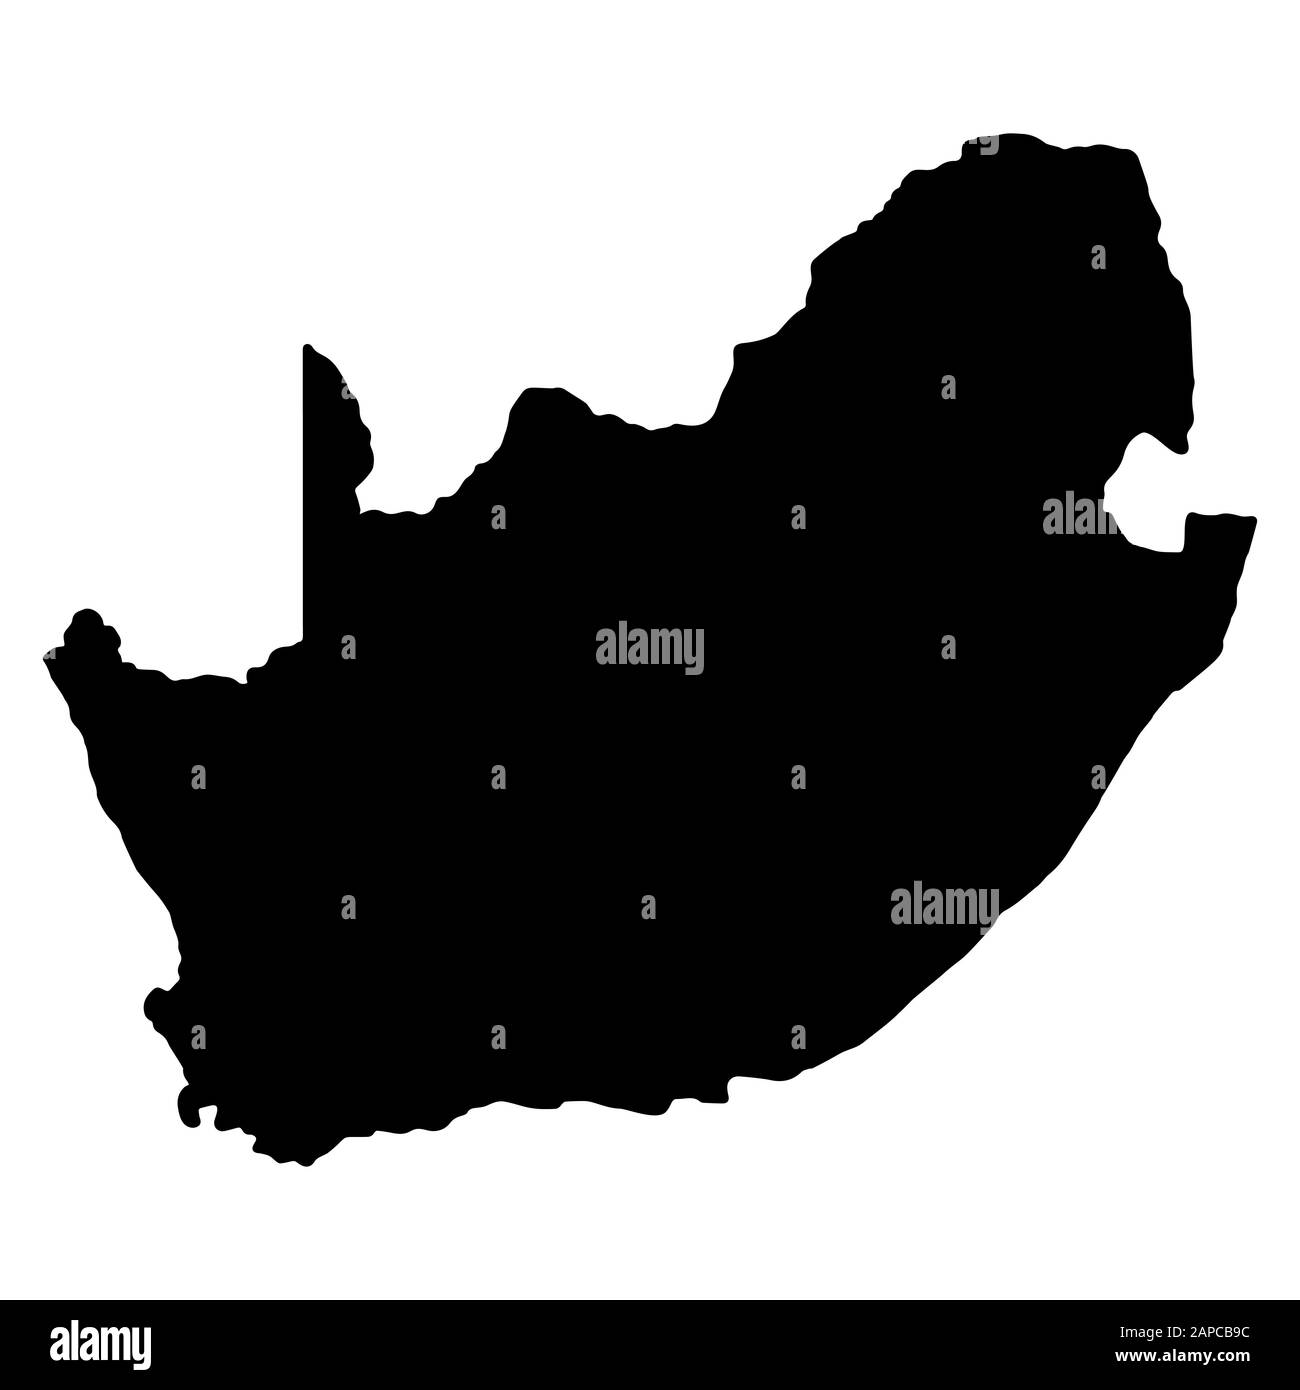 South Africa Map Silhouette Vector Stock Vector